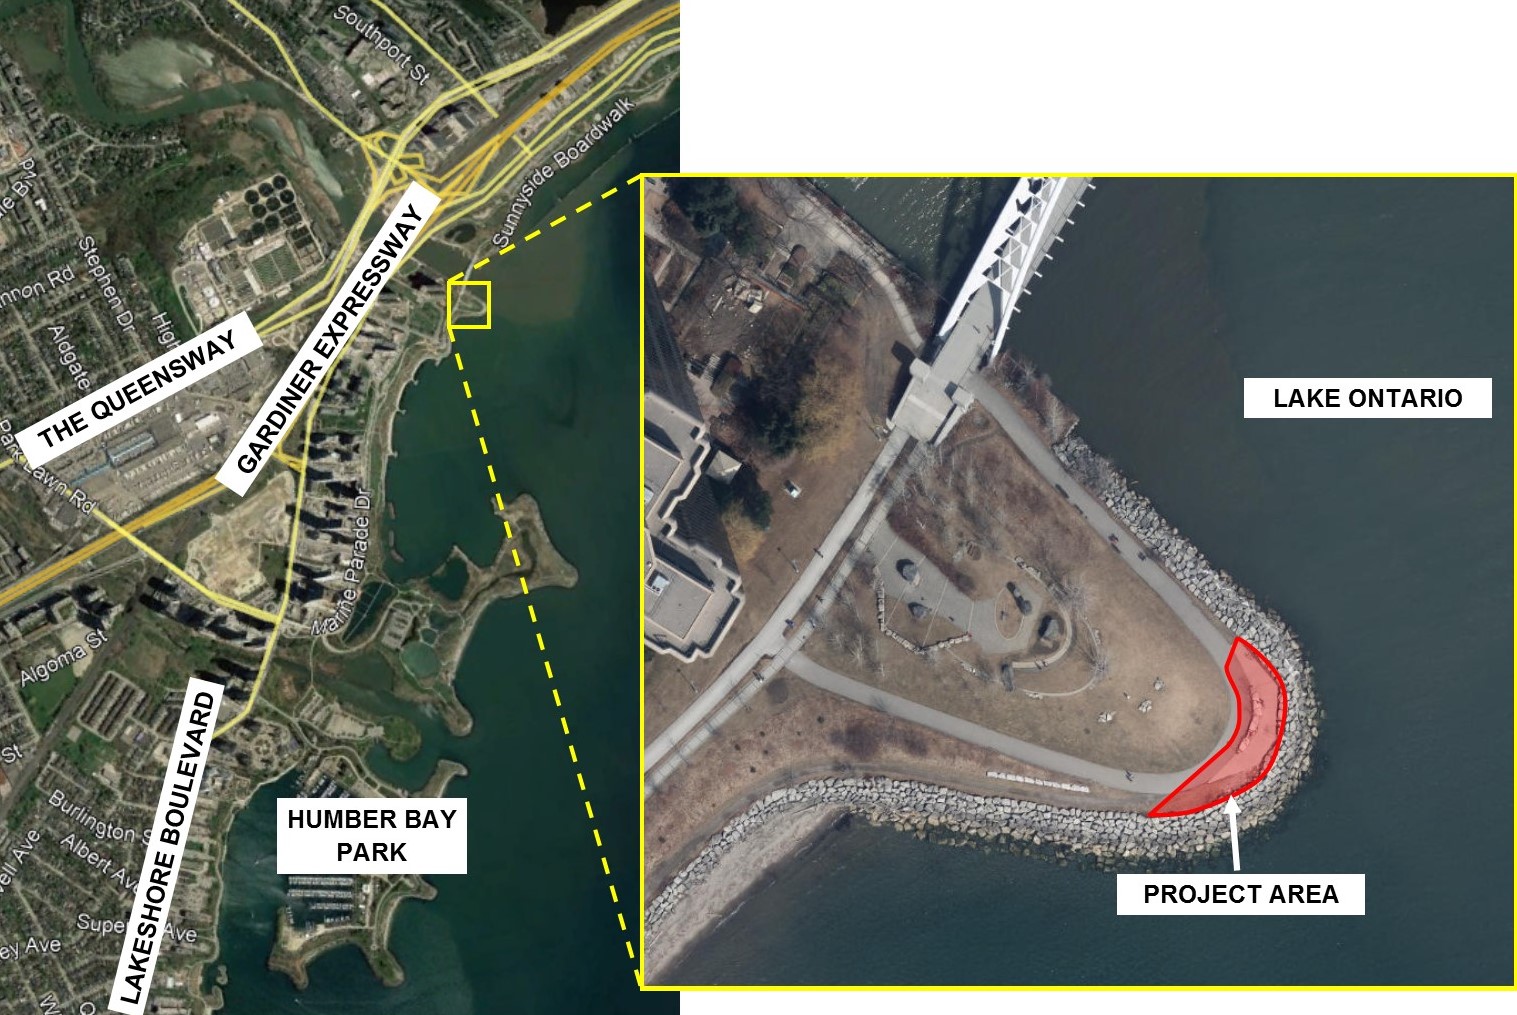 Map of the Humber Bay Shores Trail Maintenance project location and work area. Source: TRCA, 2019.